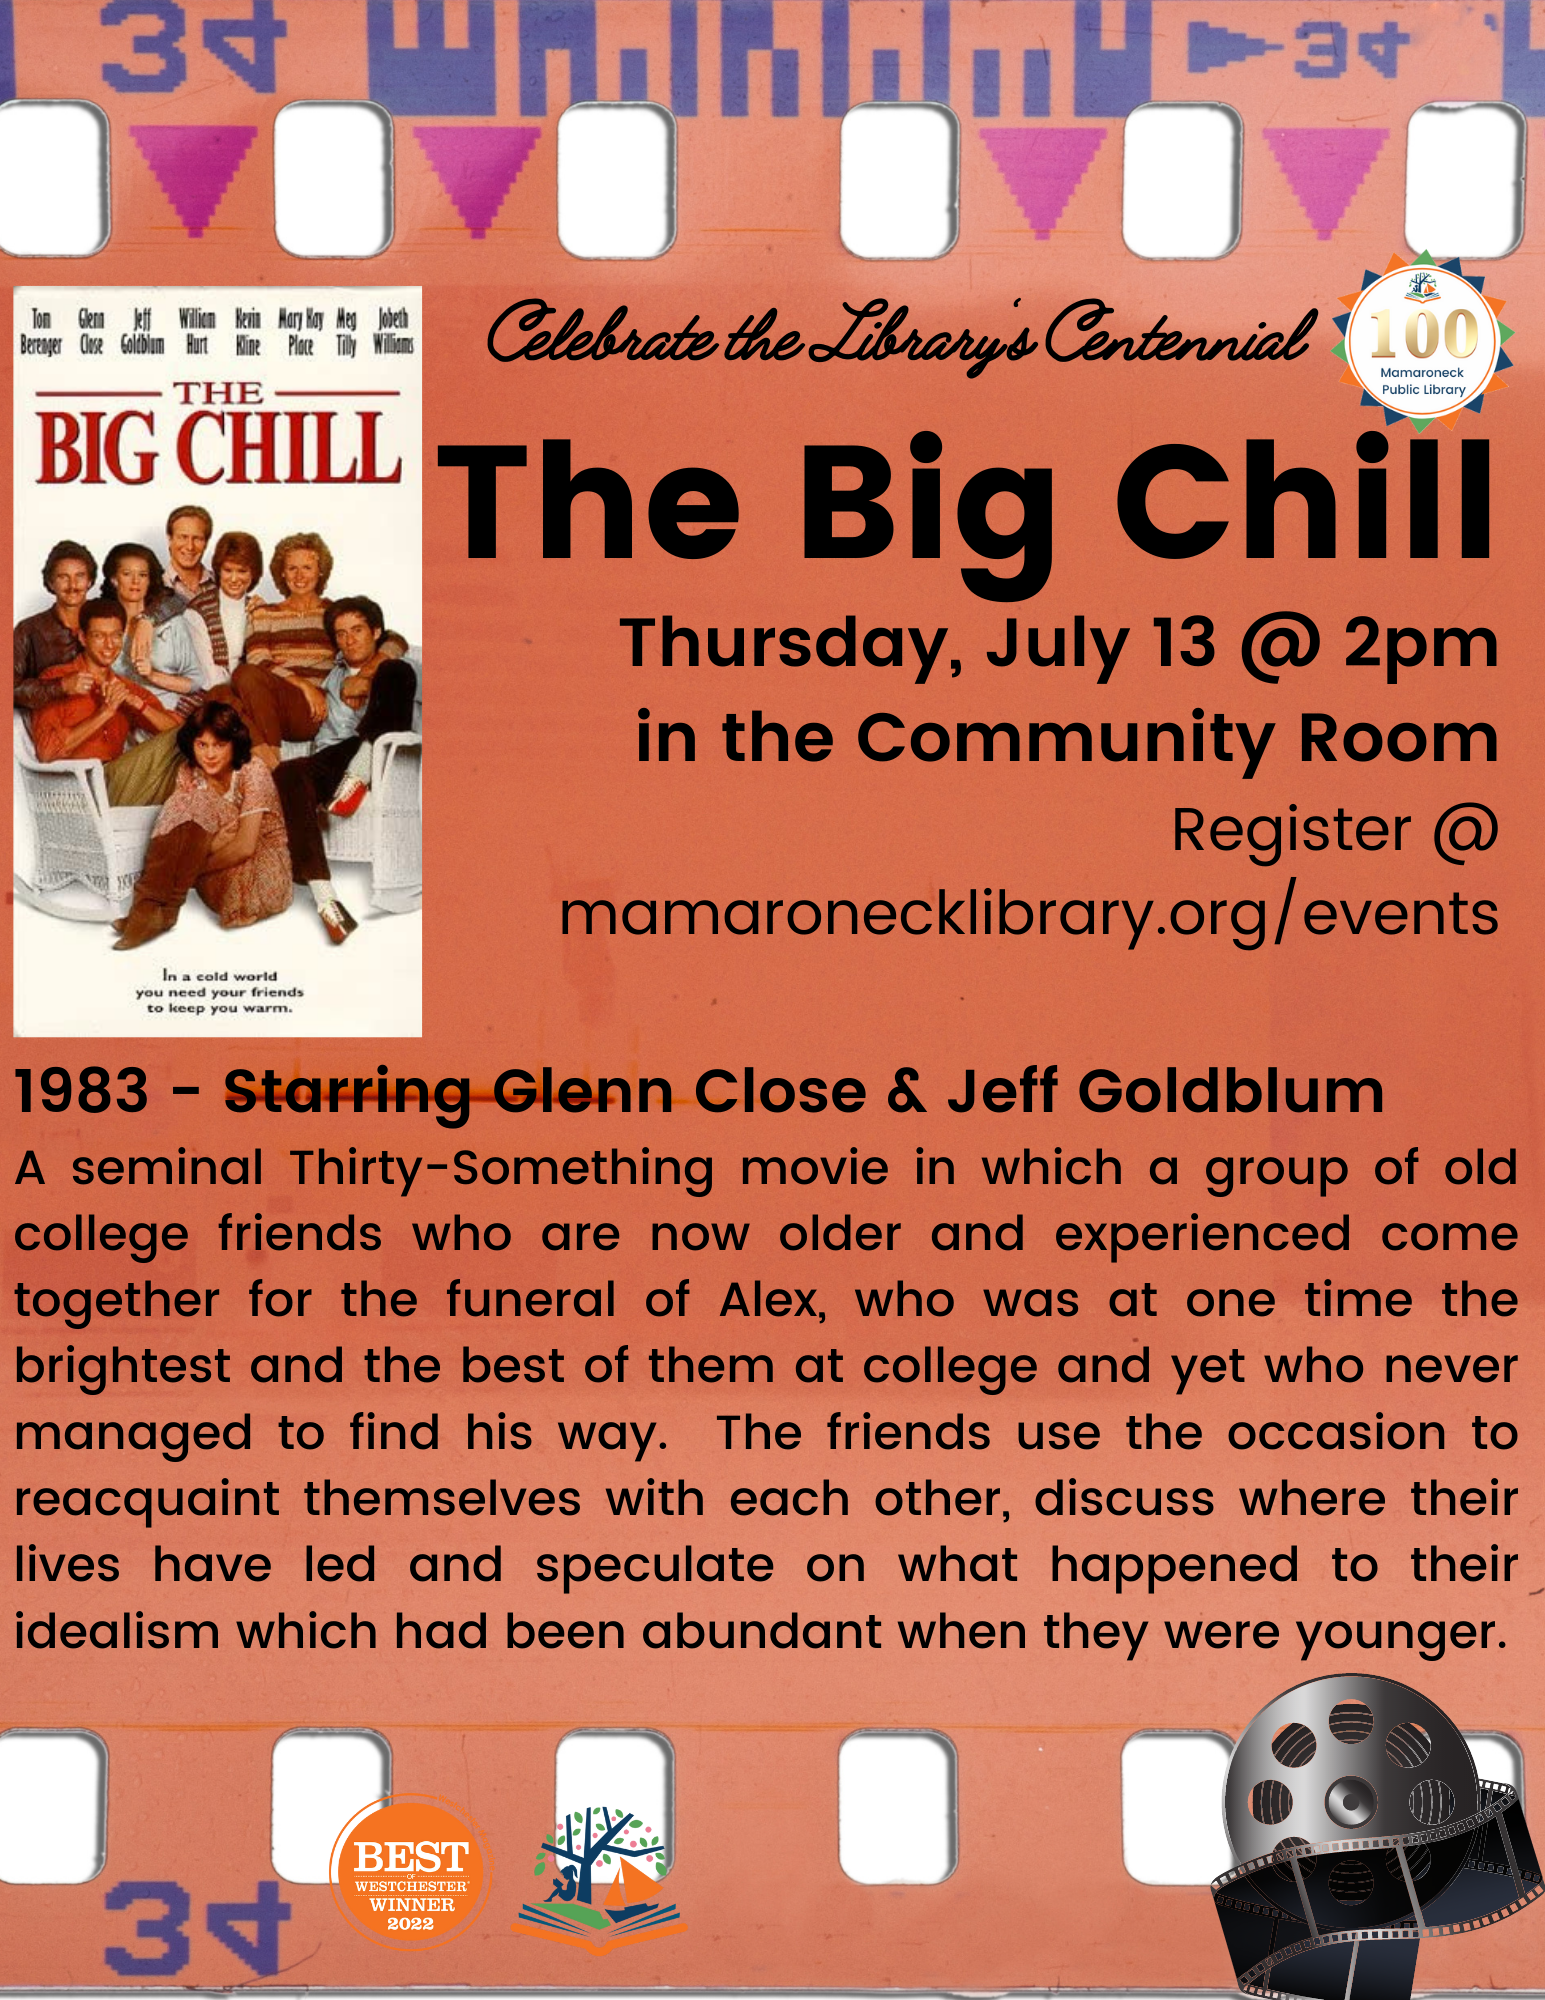 7/13 @ 2pm in the community room: The Big Chill